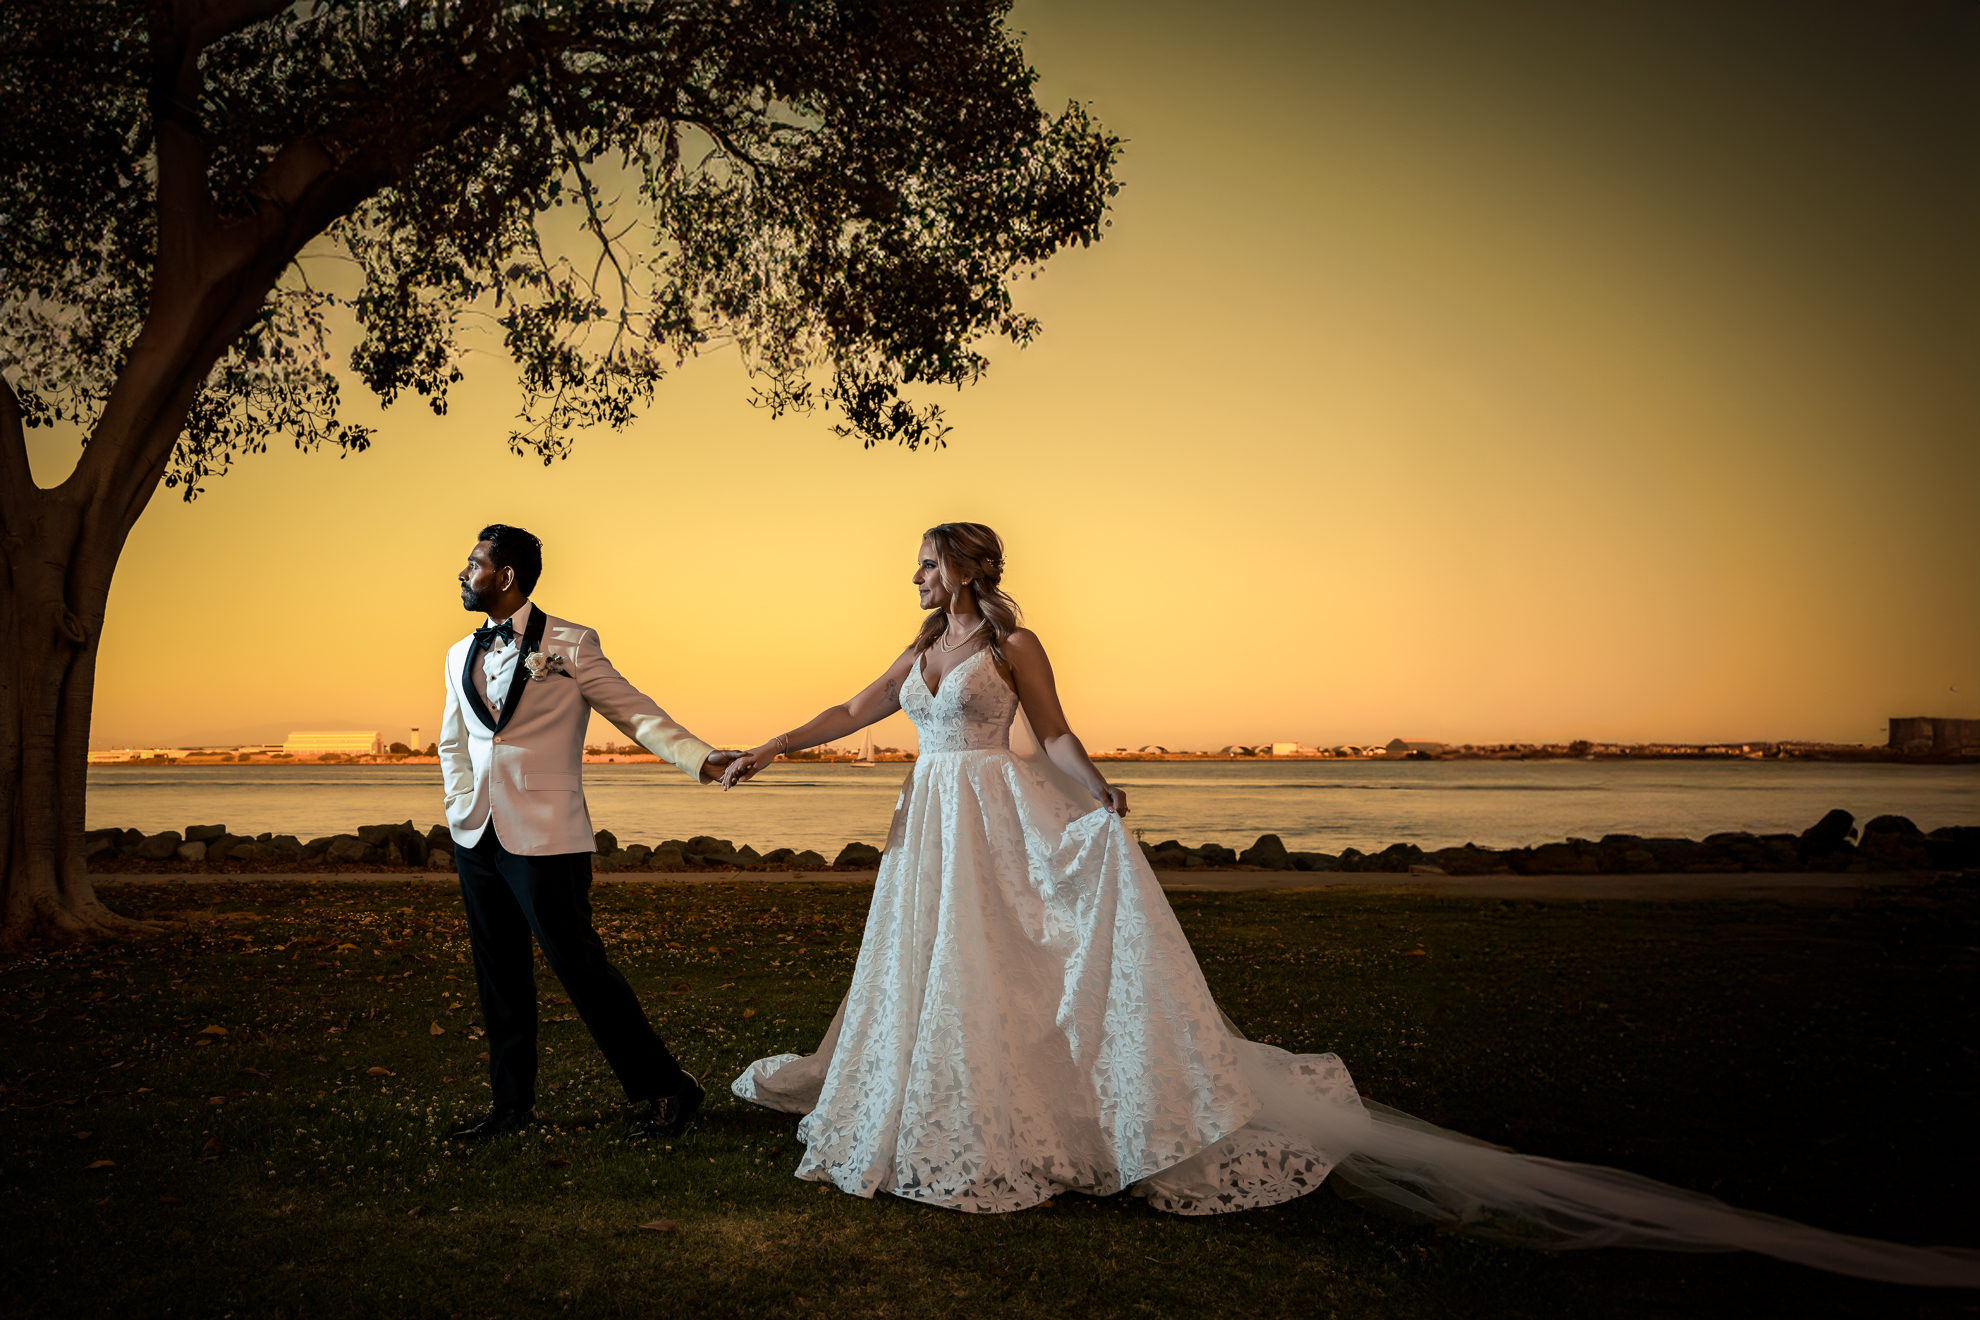 ThomasKim Photography Los Angeles Wedding Photographer A couple dressed in formal wedding attire holds hands under a tree at sunset by a waterfront. The bride wears a white gown with a long train, and the groom is in a white jacket and black pants.